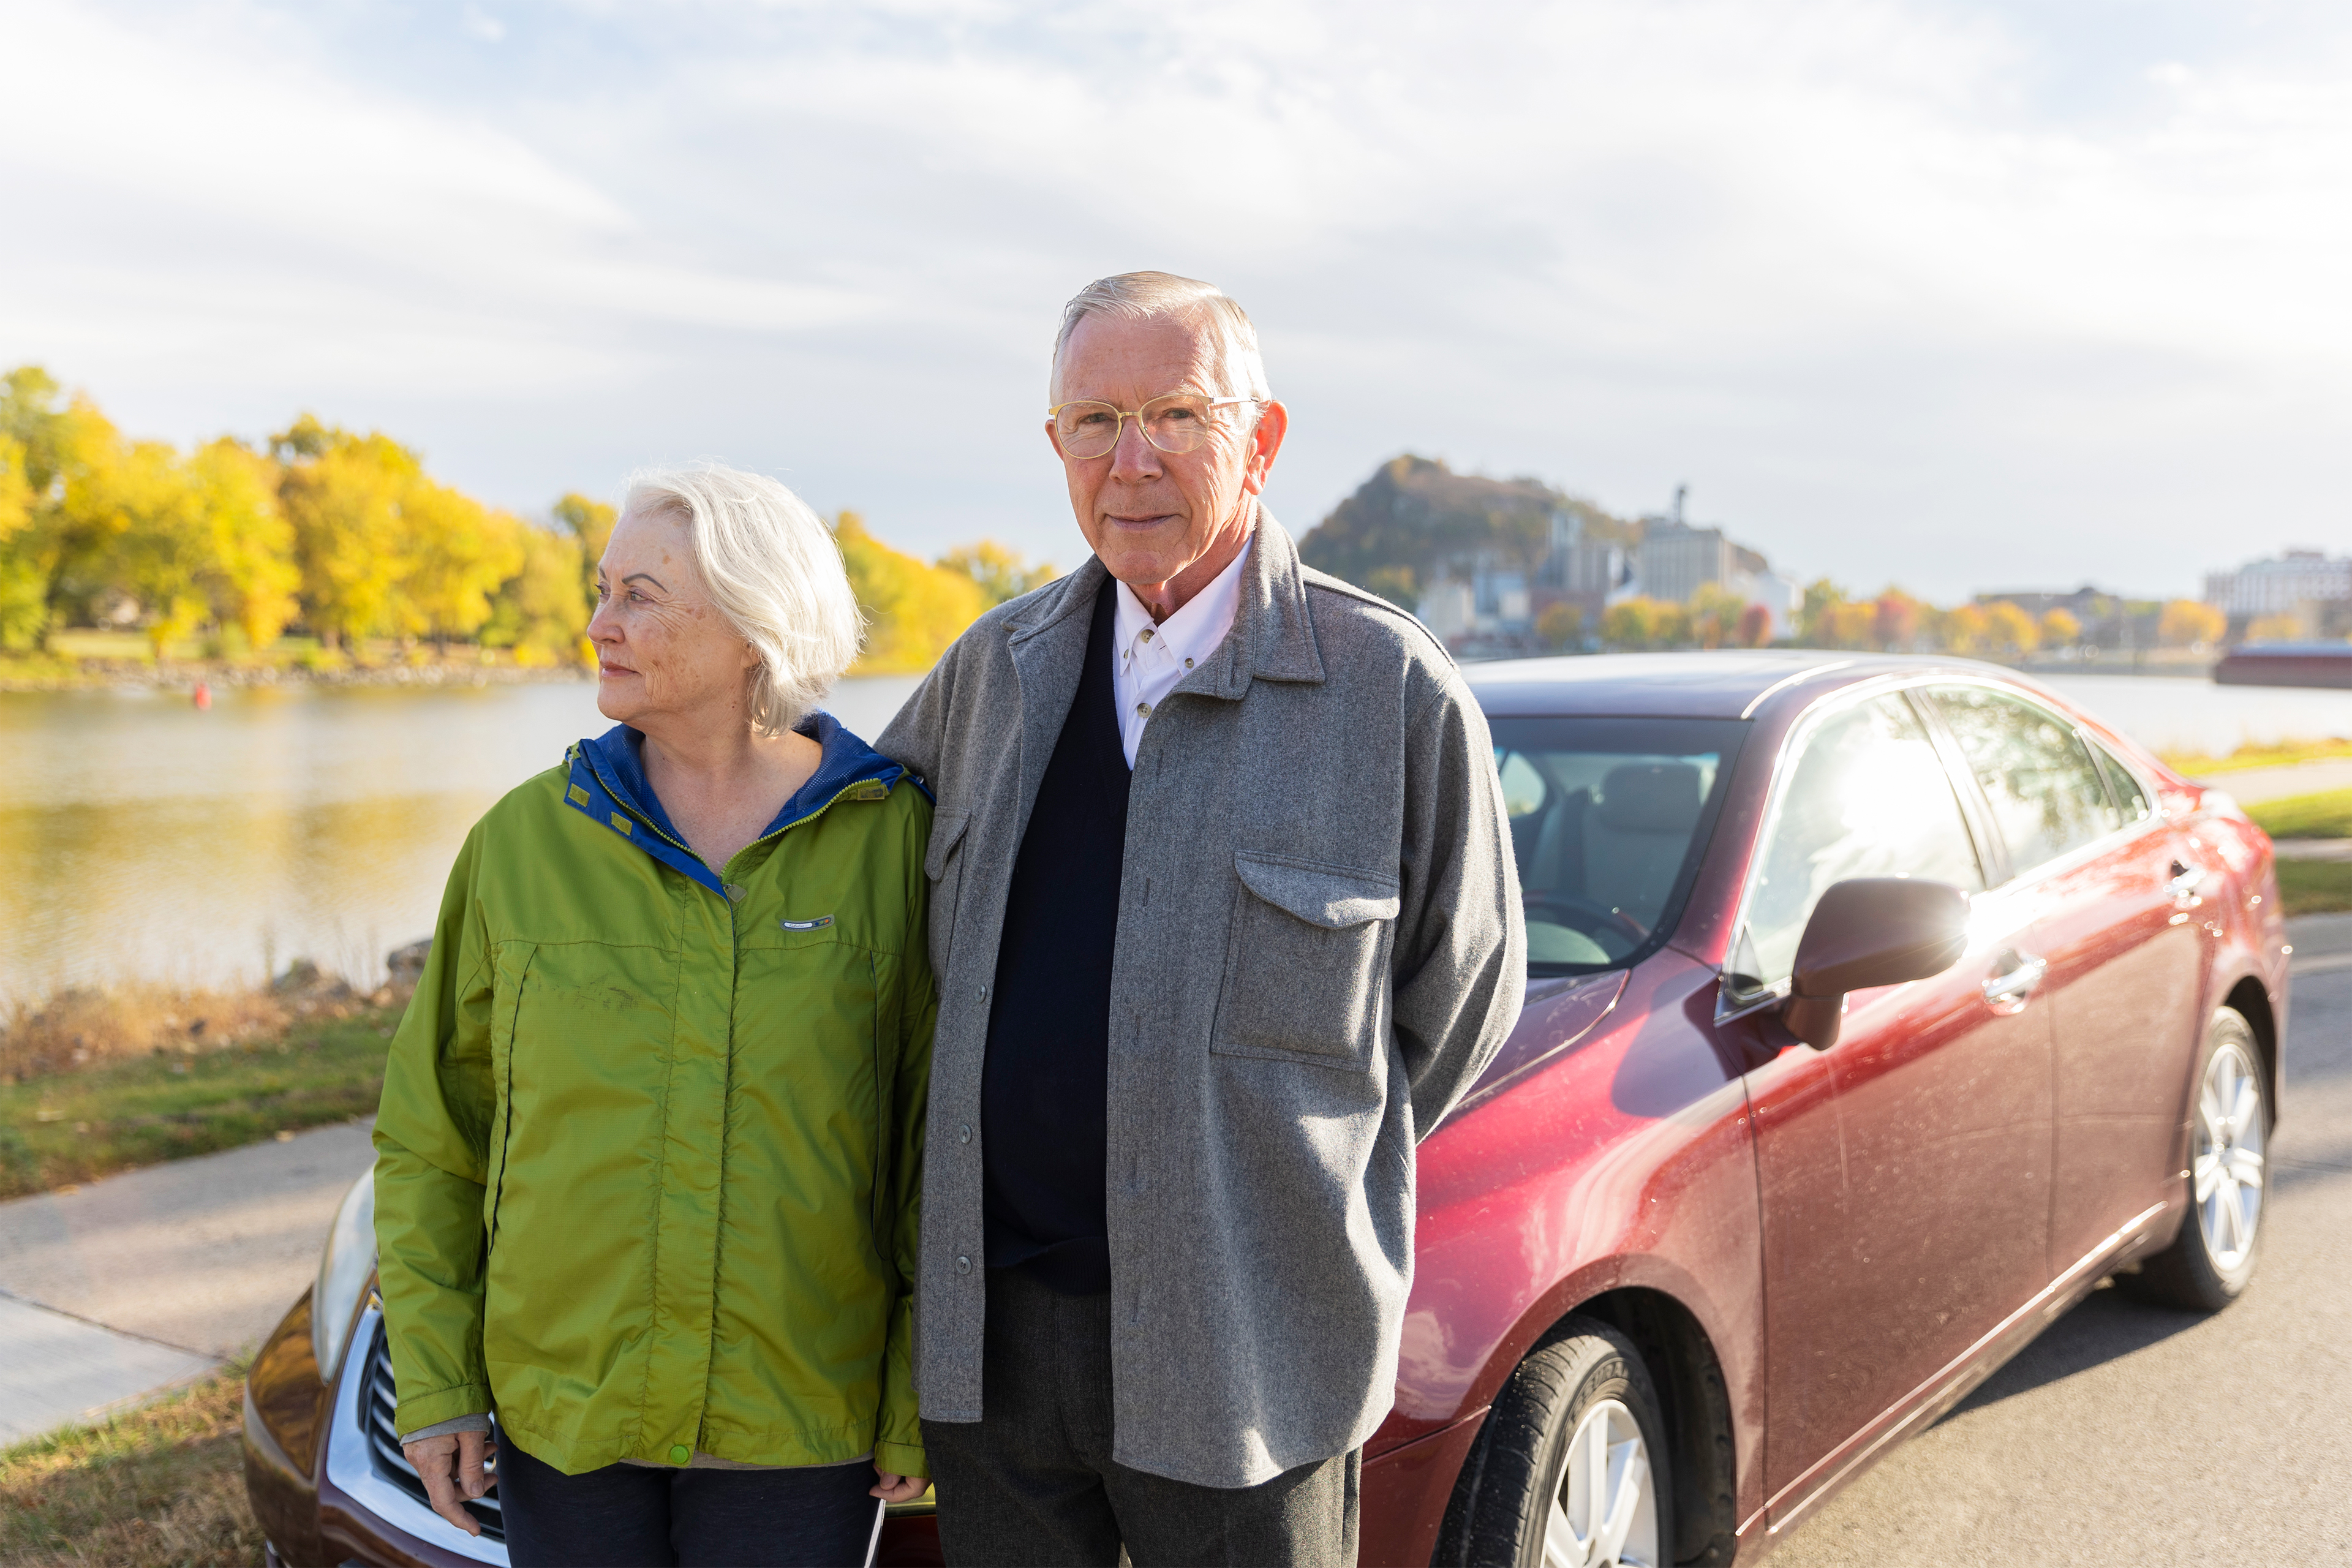 A photo shows Jim and Judie Maybach standing together outside by their car. The city of Red Wing, Minnesota, is seen behind them.